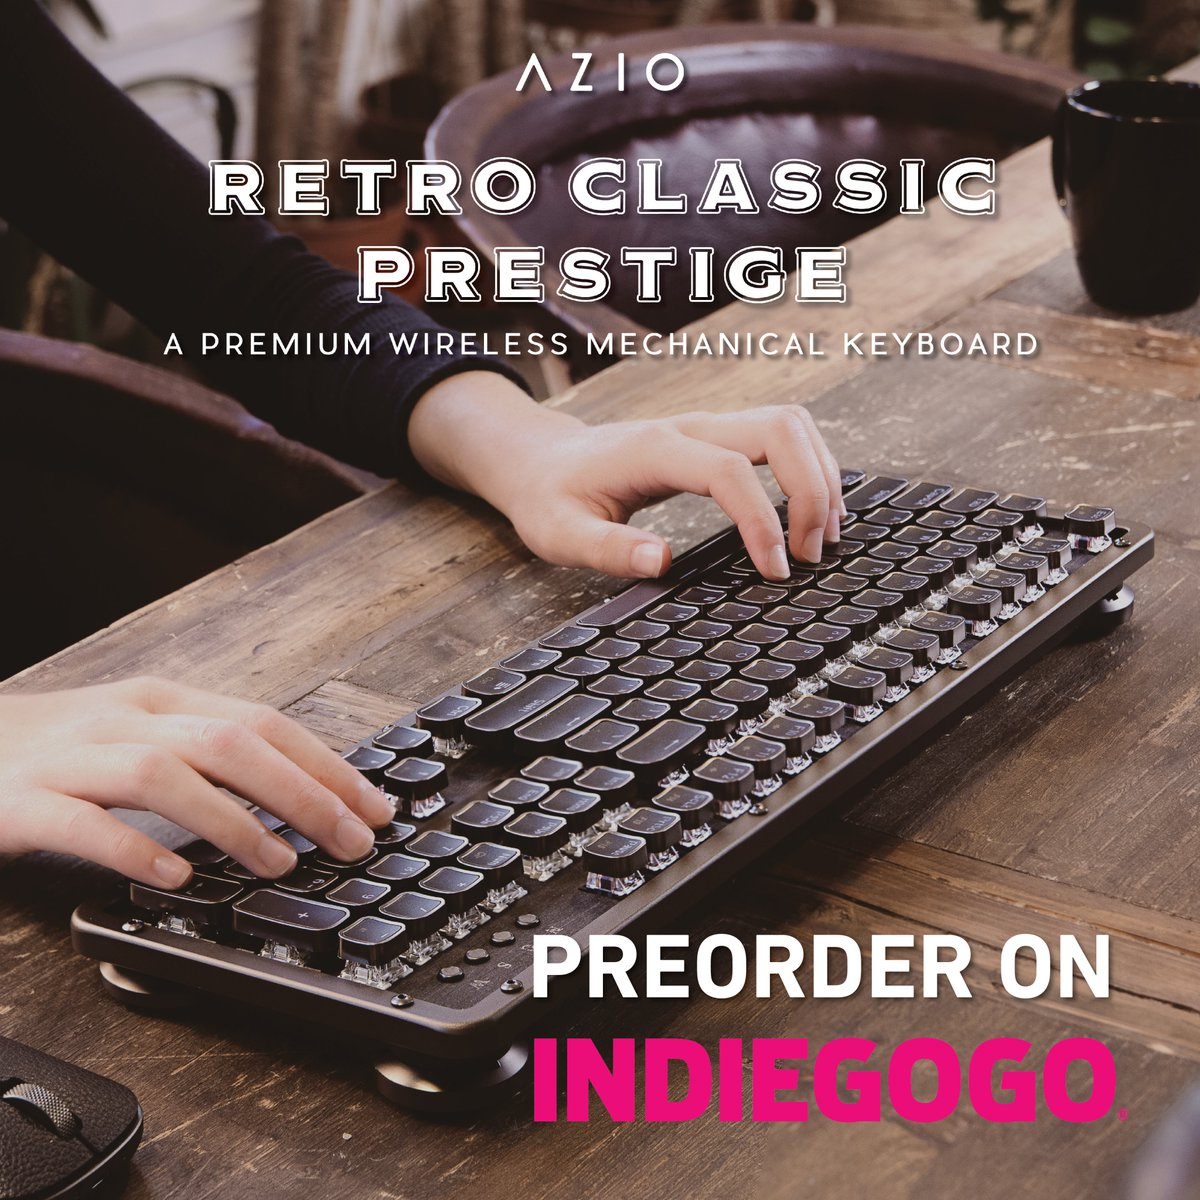 The RC Prestige is on #Indiegogo! #Preorder now at the link in bio! #azio #keyboard #mechanicalkeyboard #retro #classic #vintage #typewriter #steampunk #campaign #crowdfunding #desksetup #lifestyle #premium #design #tech #writing #projectwelove #discount #writers #book